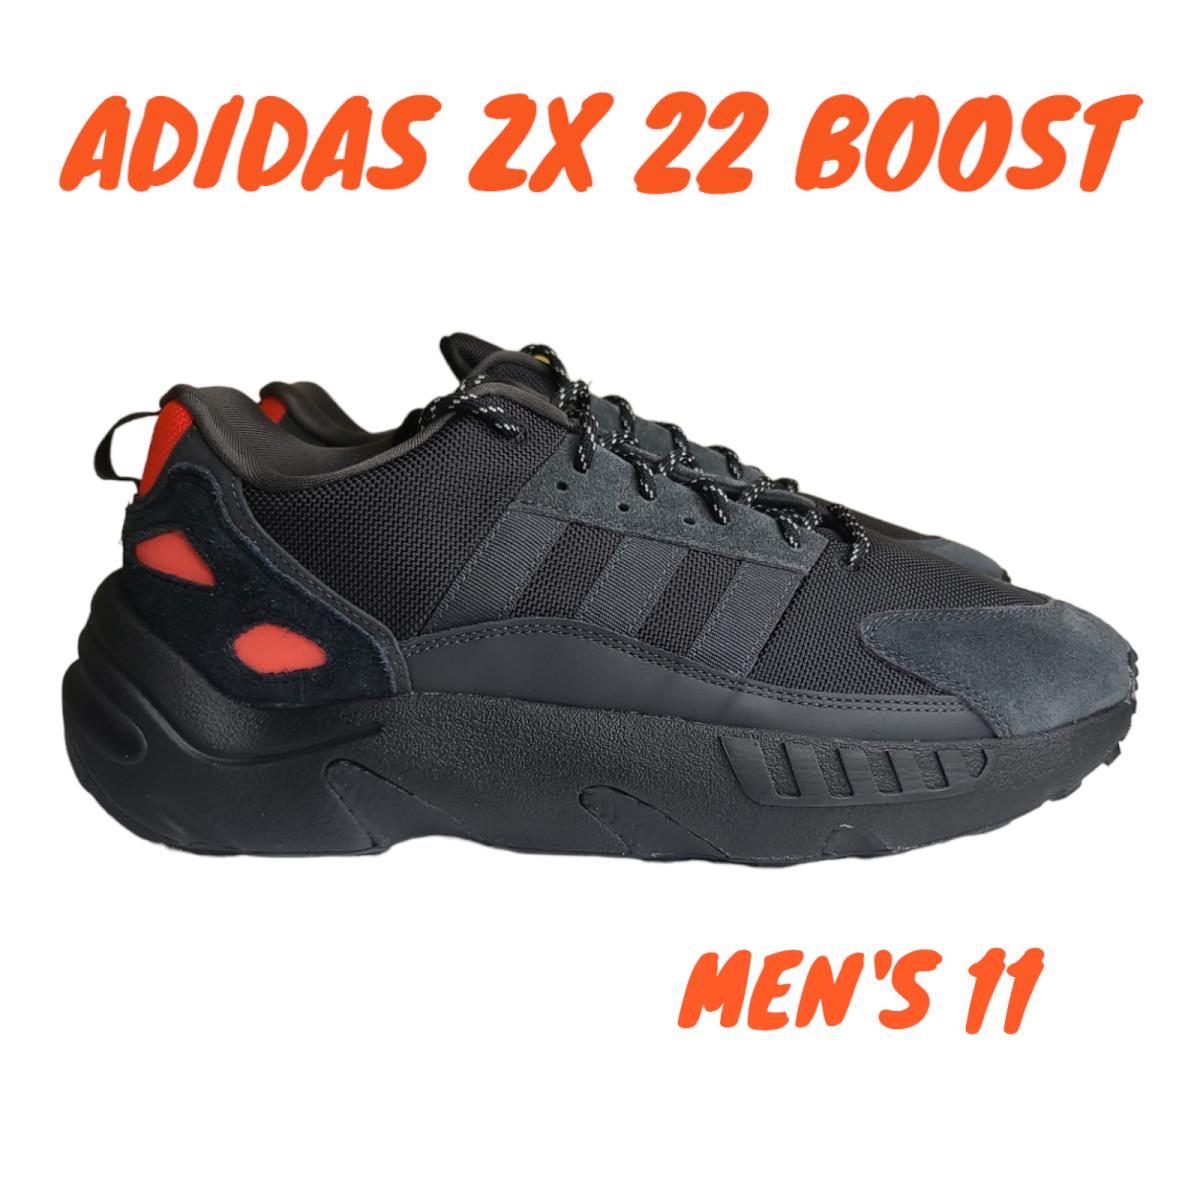 Mens Adidas ZX 22 Boost Casual Trainer Shoes Size 11 GX7007 Suede Rugged